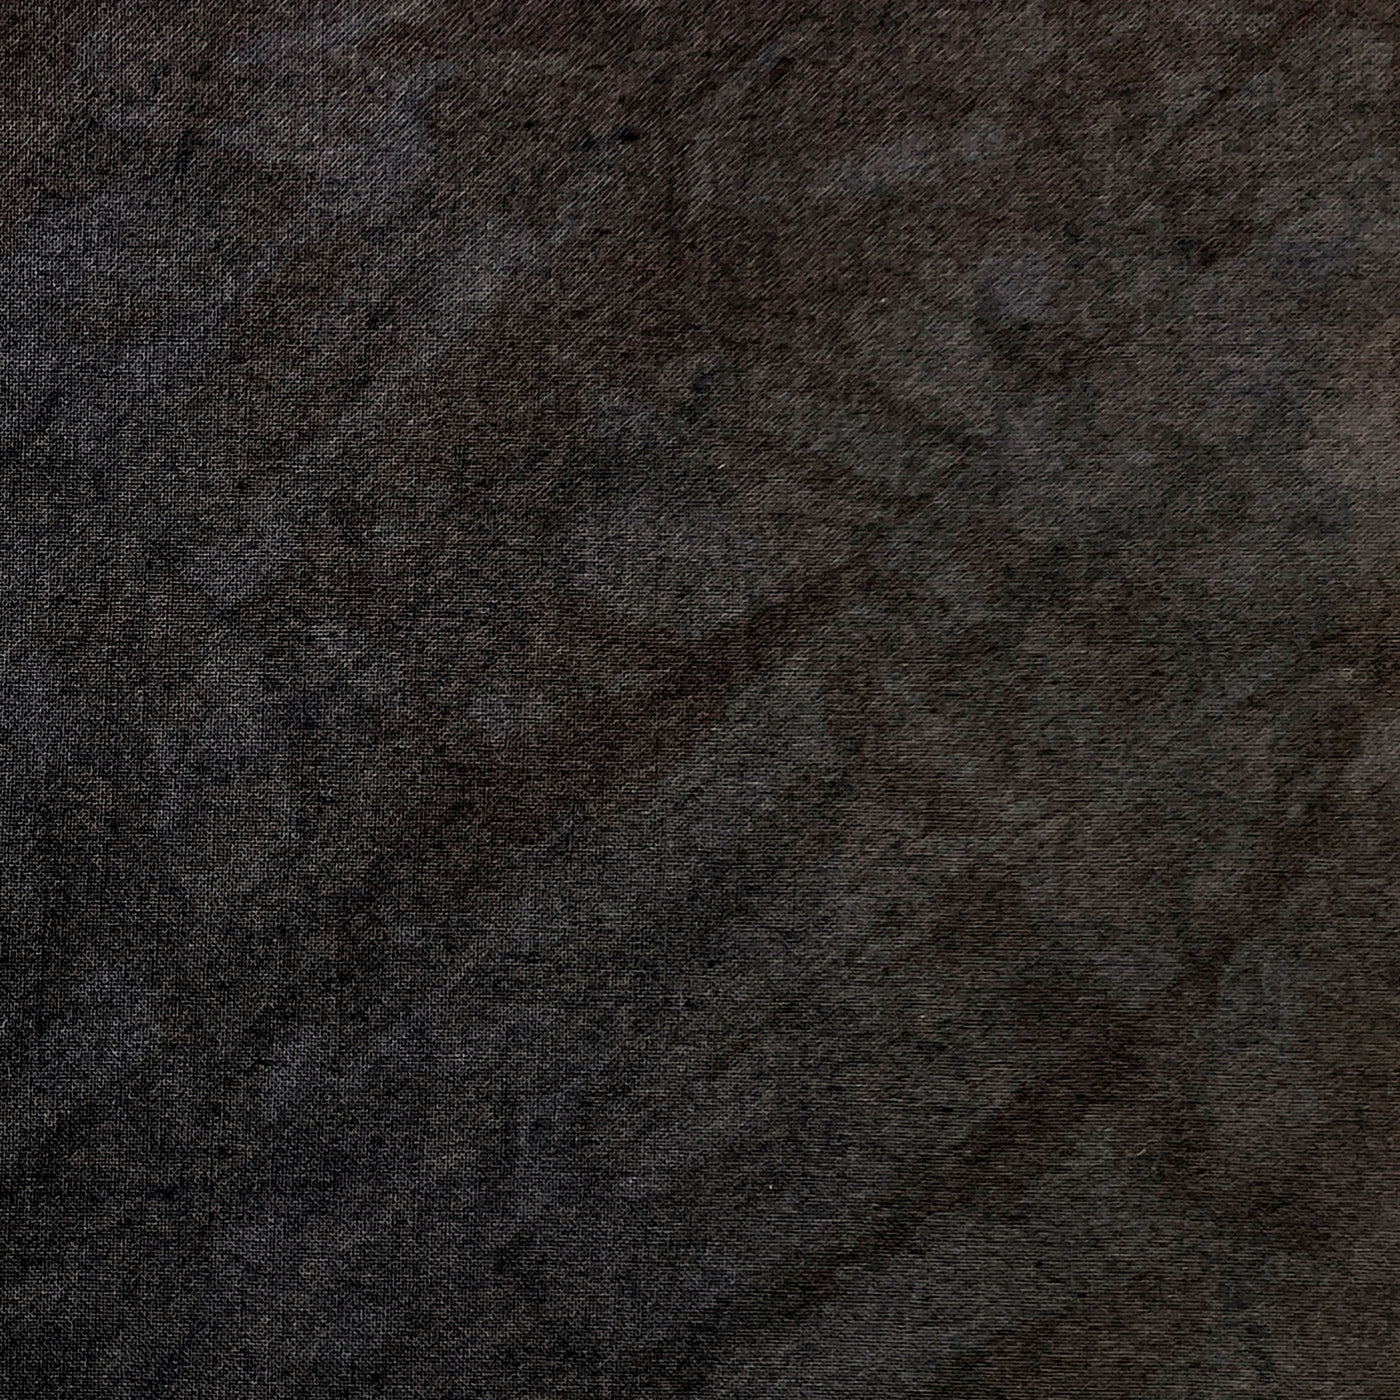 Cherrywood Hand Dyed Fabric - Charcoal 1310